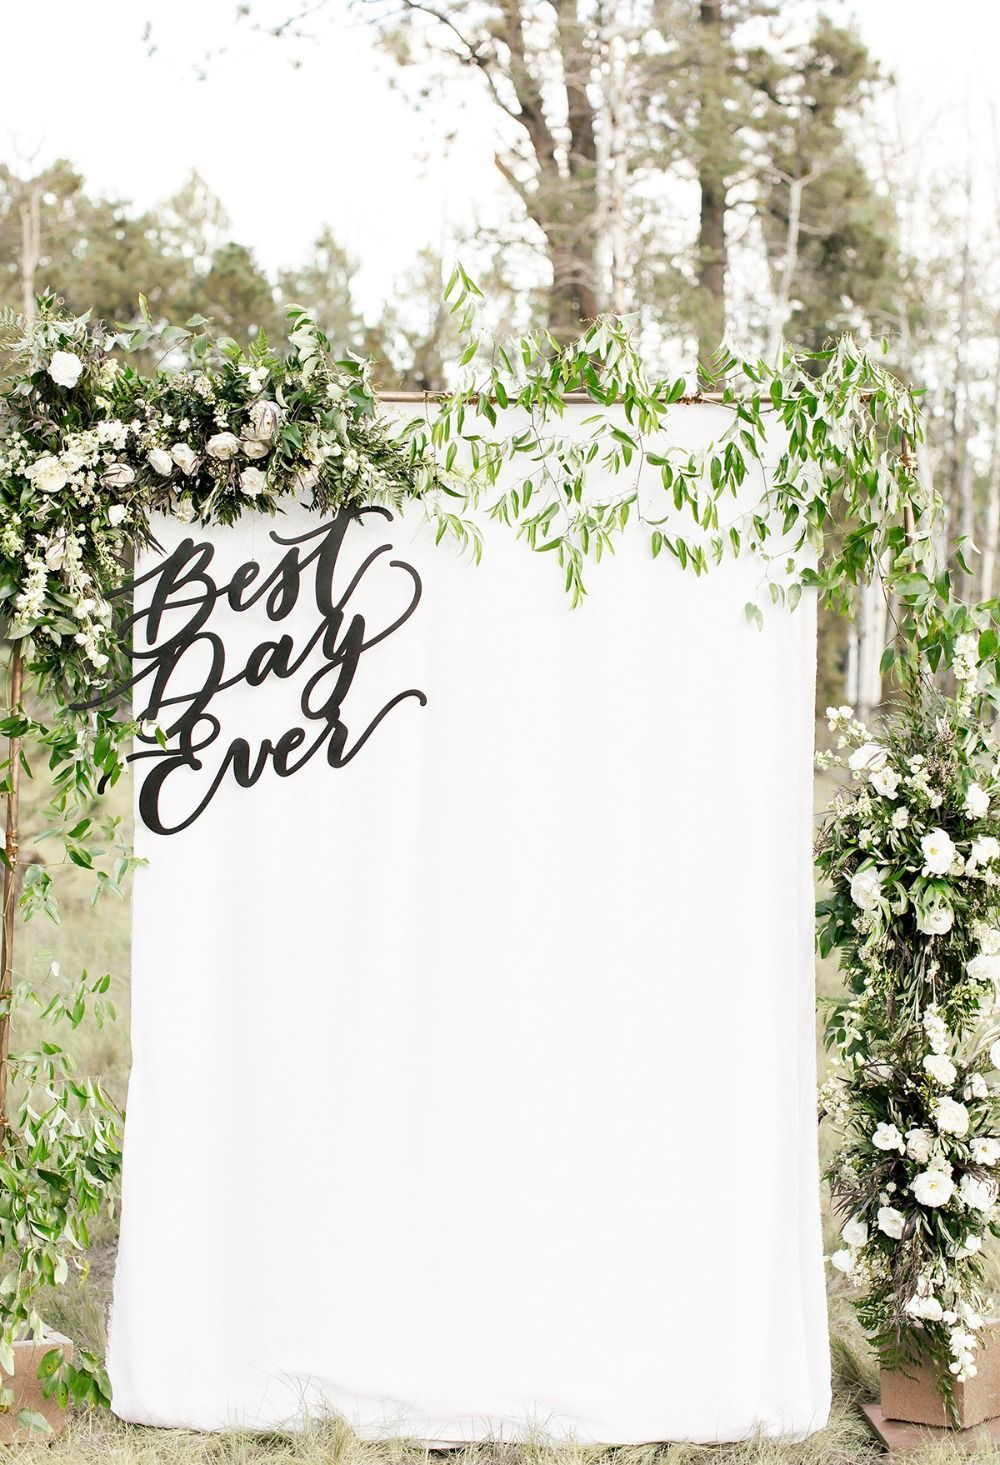 Intimate Outdoor Chic Wedding in the Middle of Arizona Pines -   12 wedding Backdrop photobooth ideas